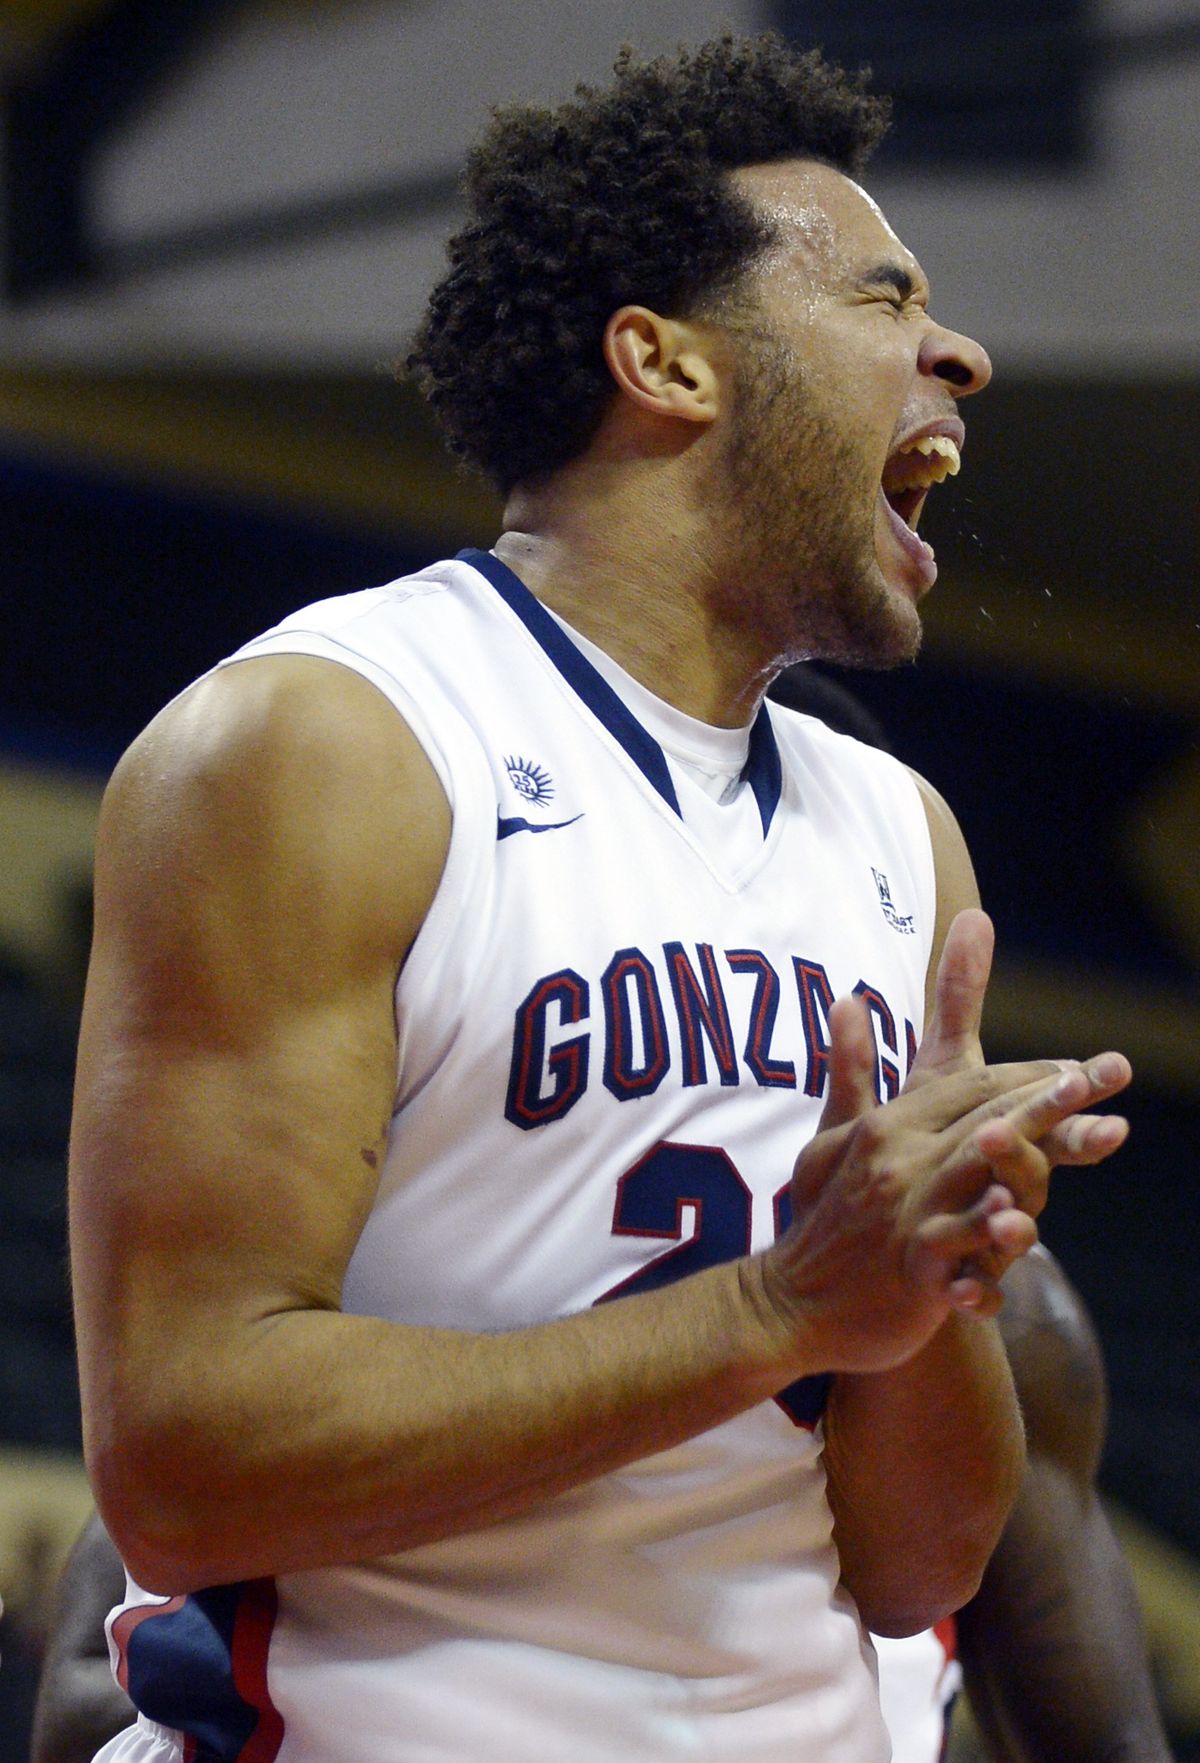 Gonzaga forward Elias Harris reacts after being fouled while going up for a shot. (Associated Press)